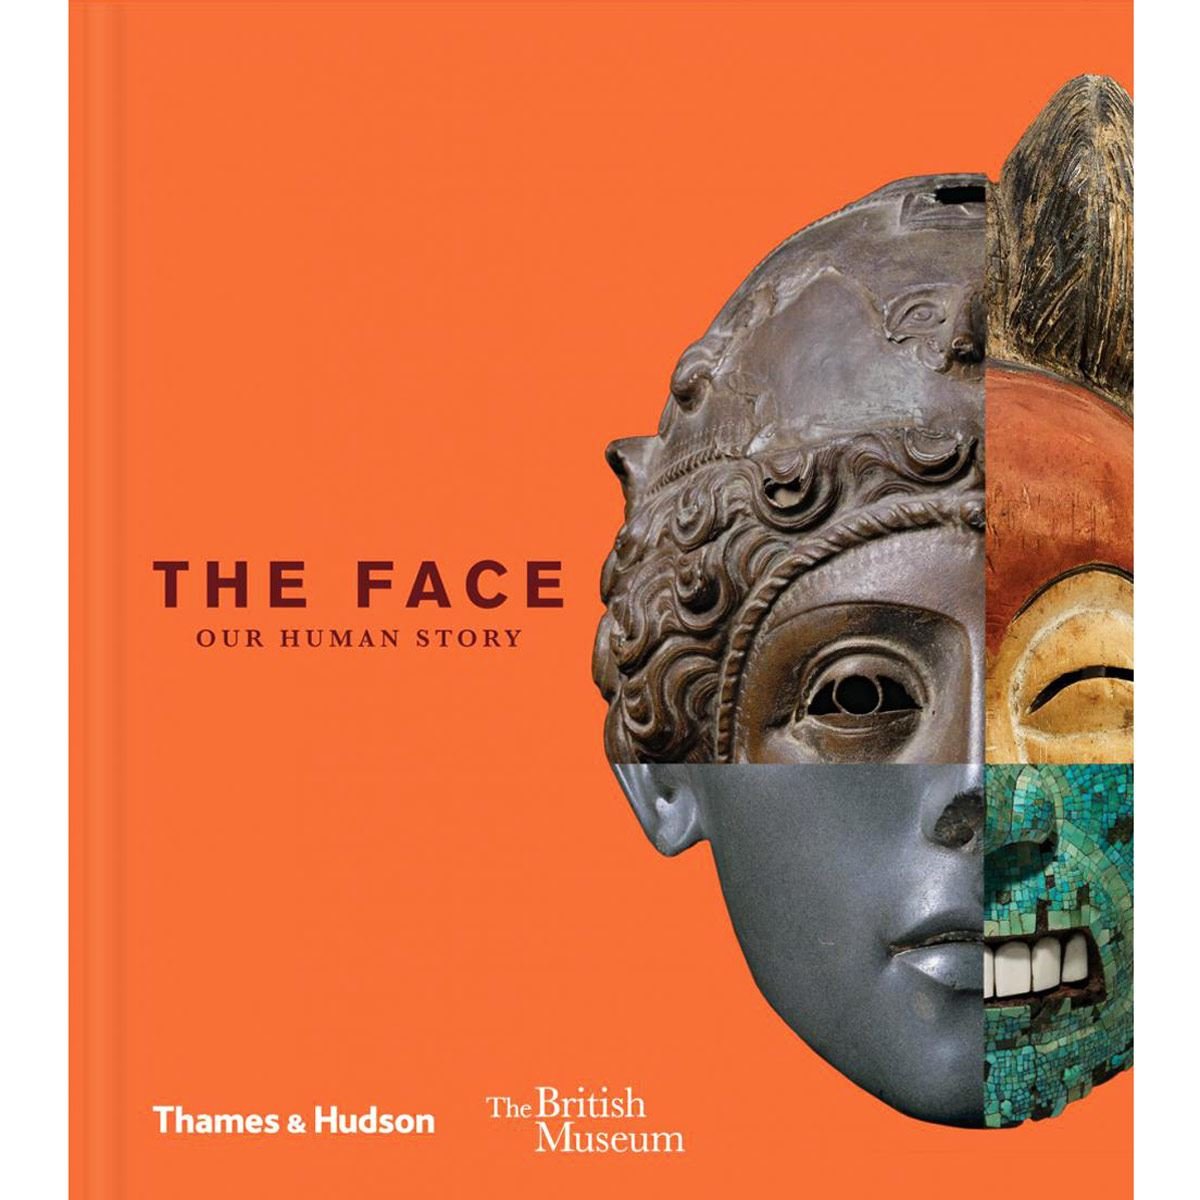 The face: our human history